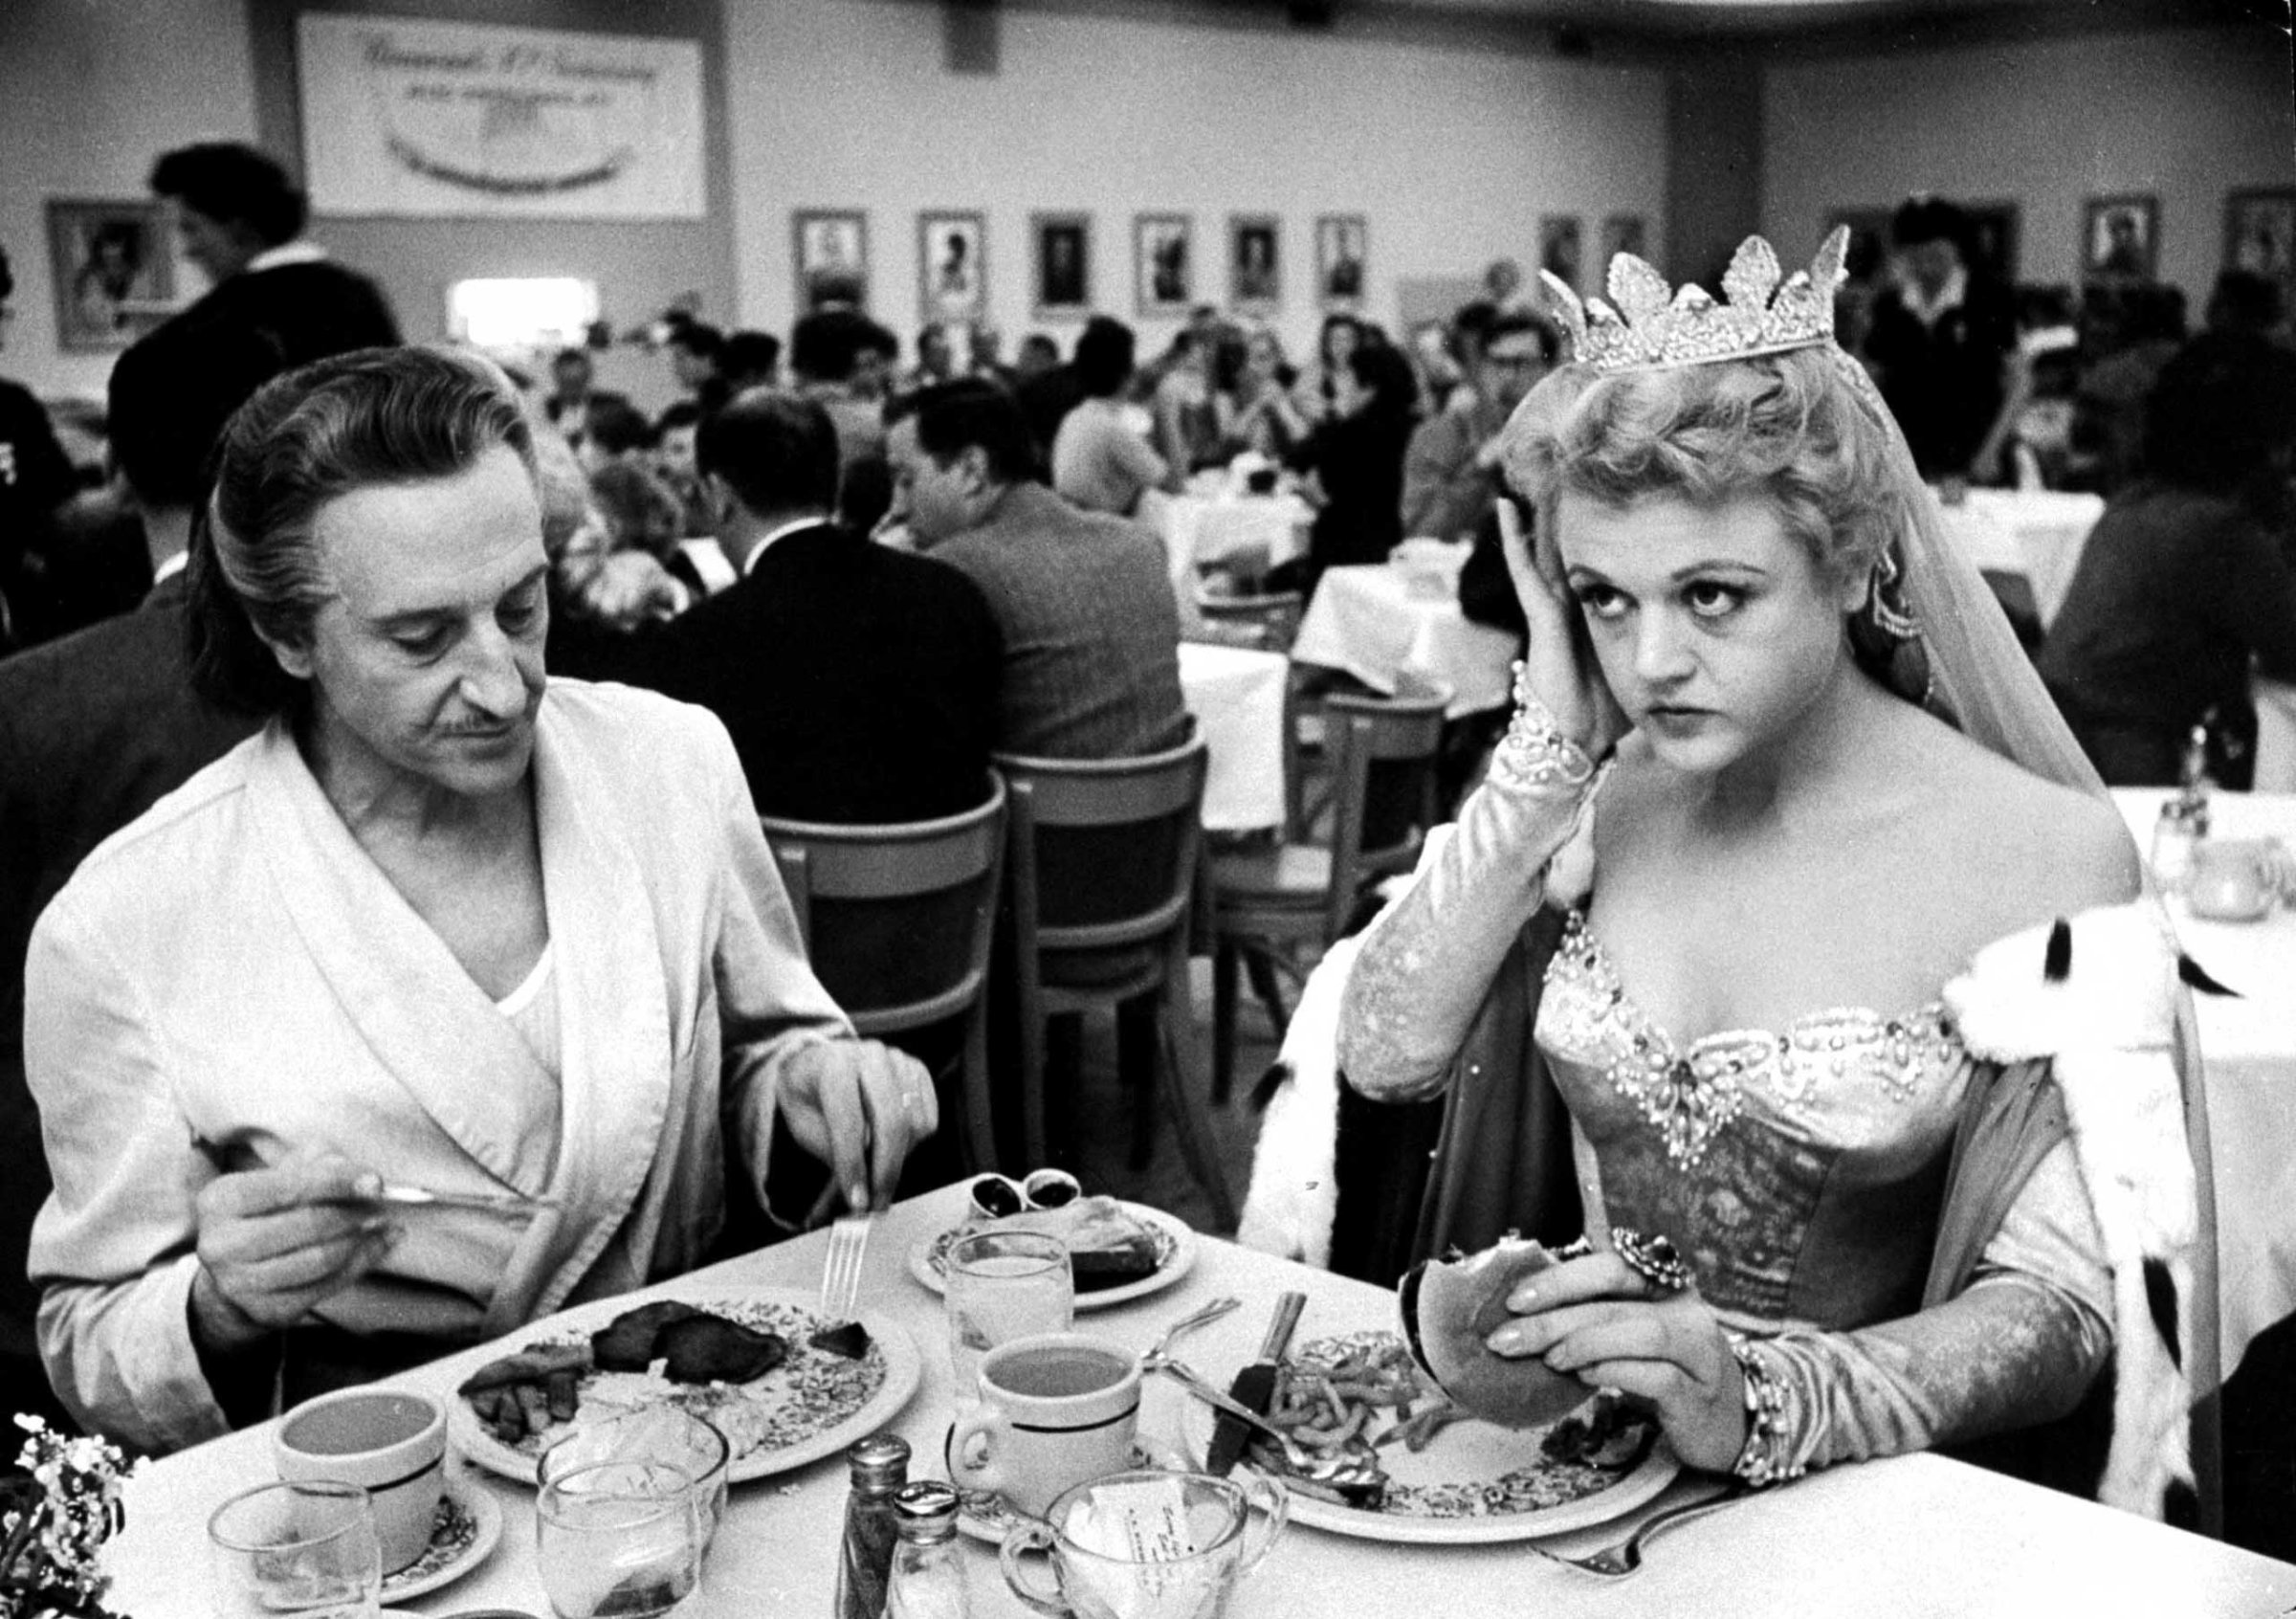 Angela Lansbury, in costume for her role in The Court Jester, eats lunch with Basil Rathbone in the Paramount Studio commissary, December 1954.